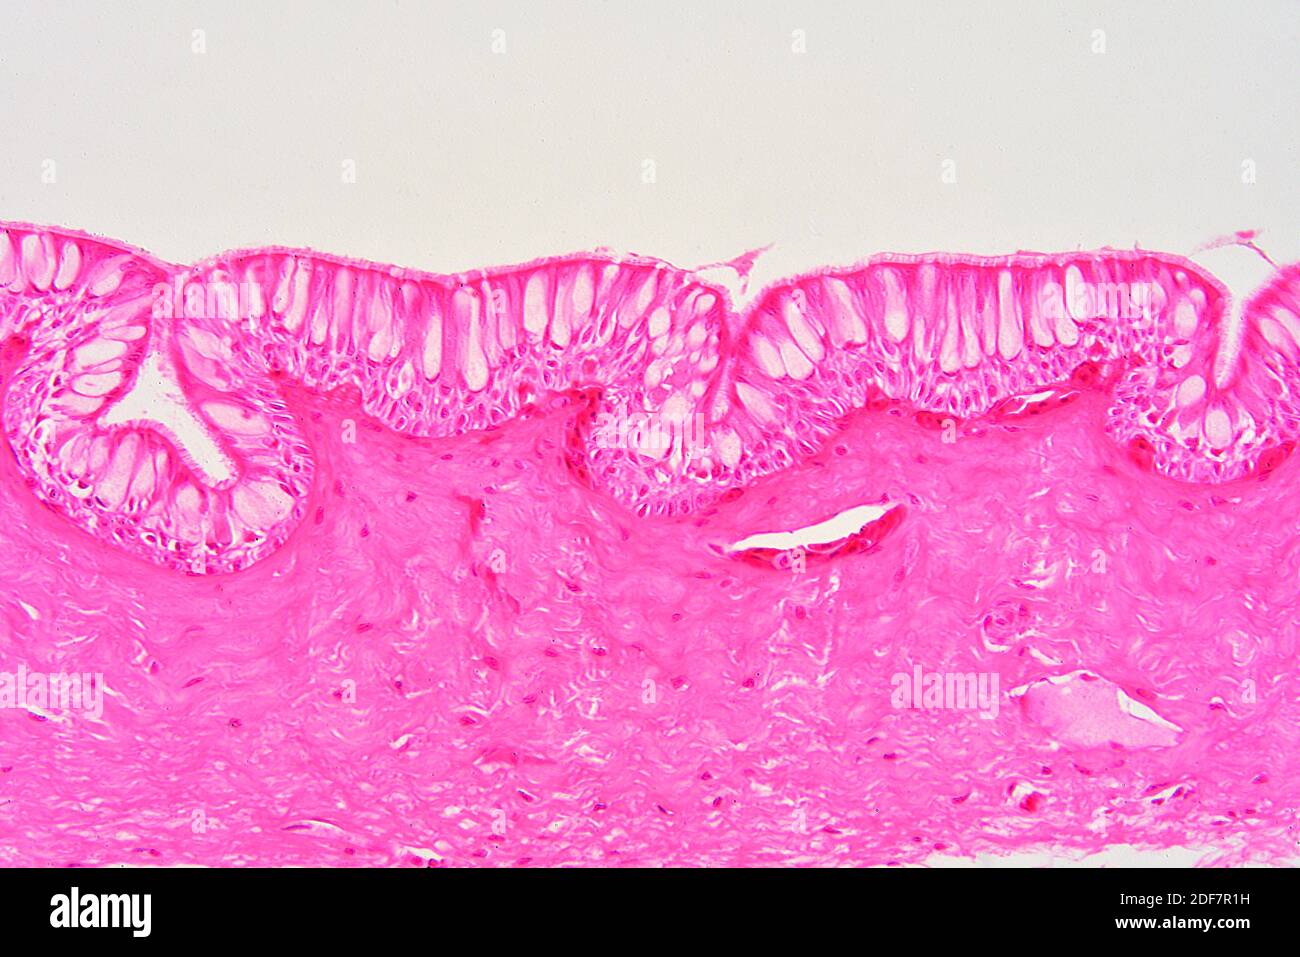 Human columnar ciliated epithelium. X150 at 10 cm wide. Stock Photo